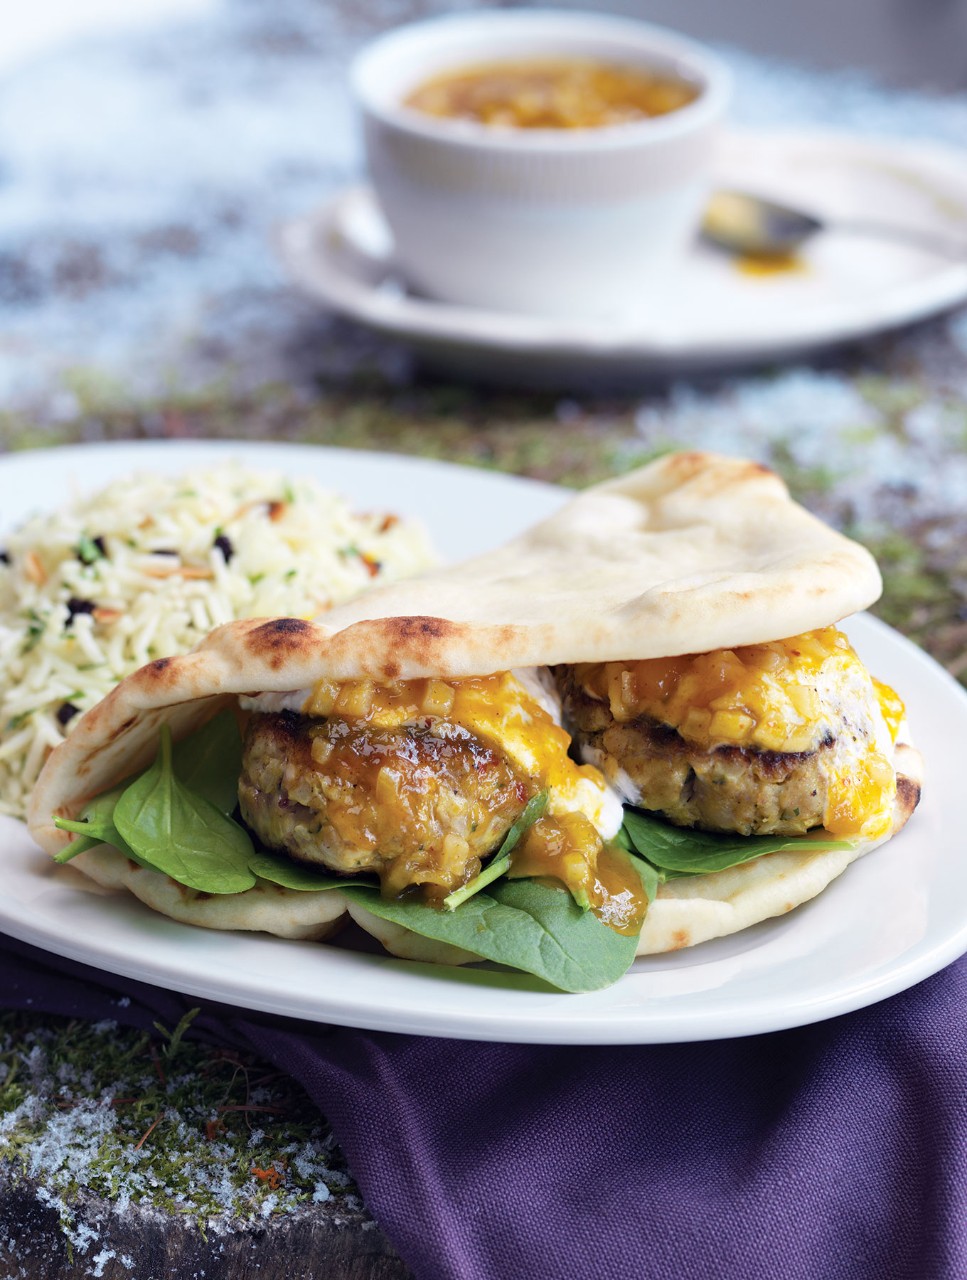 Curry Chicken Burgers with Apple Chutney & Spiced Basmati Almond Pilaf